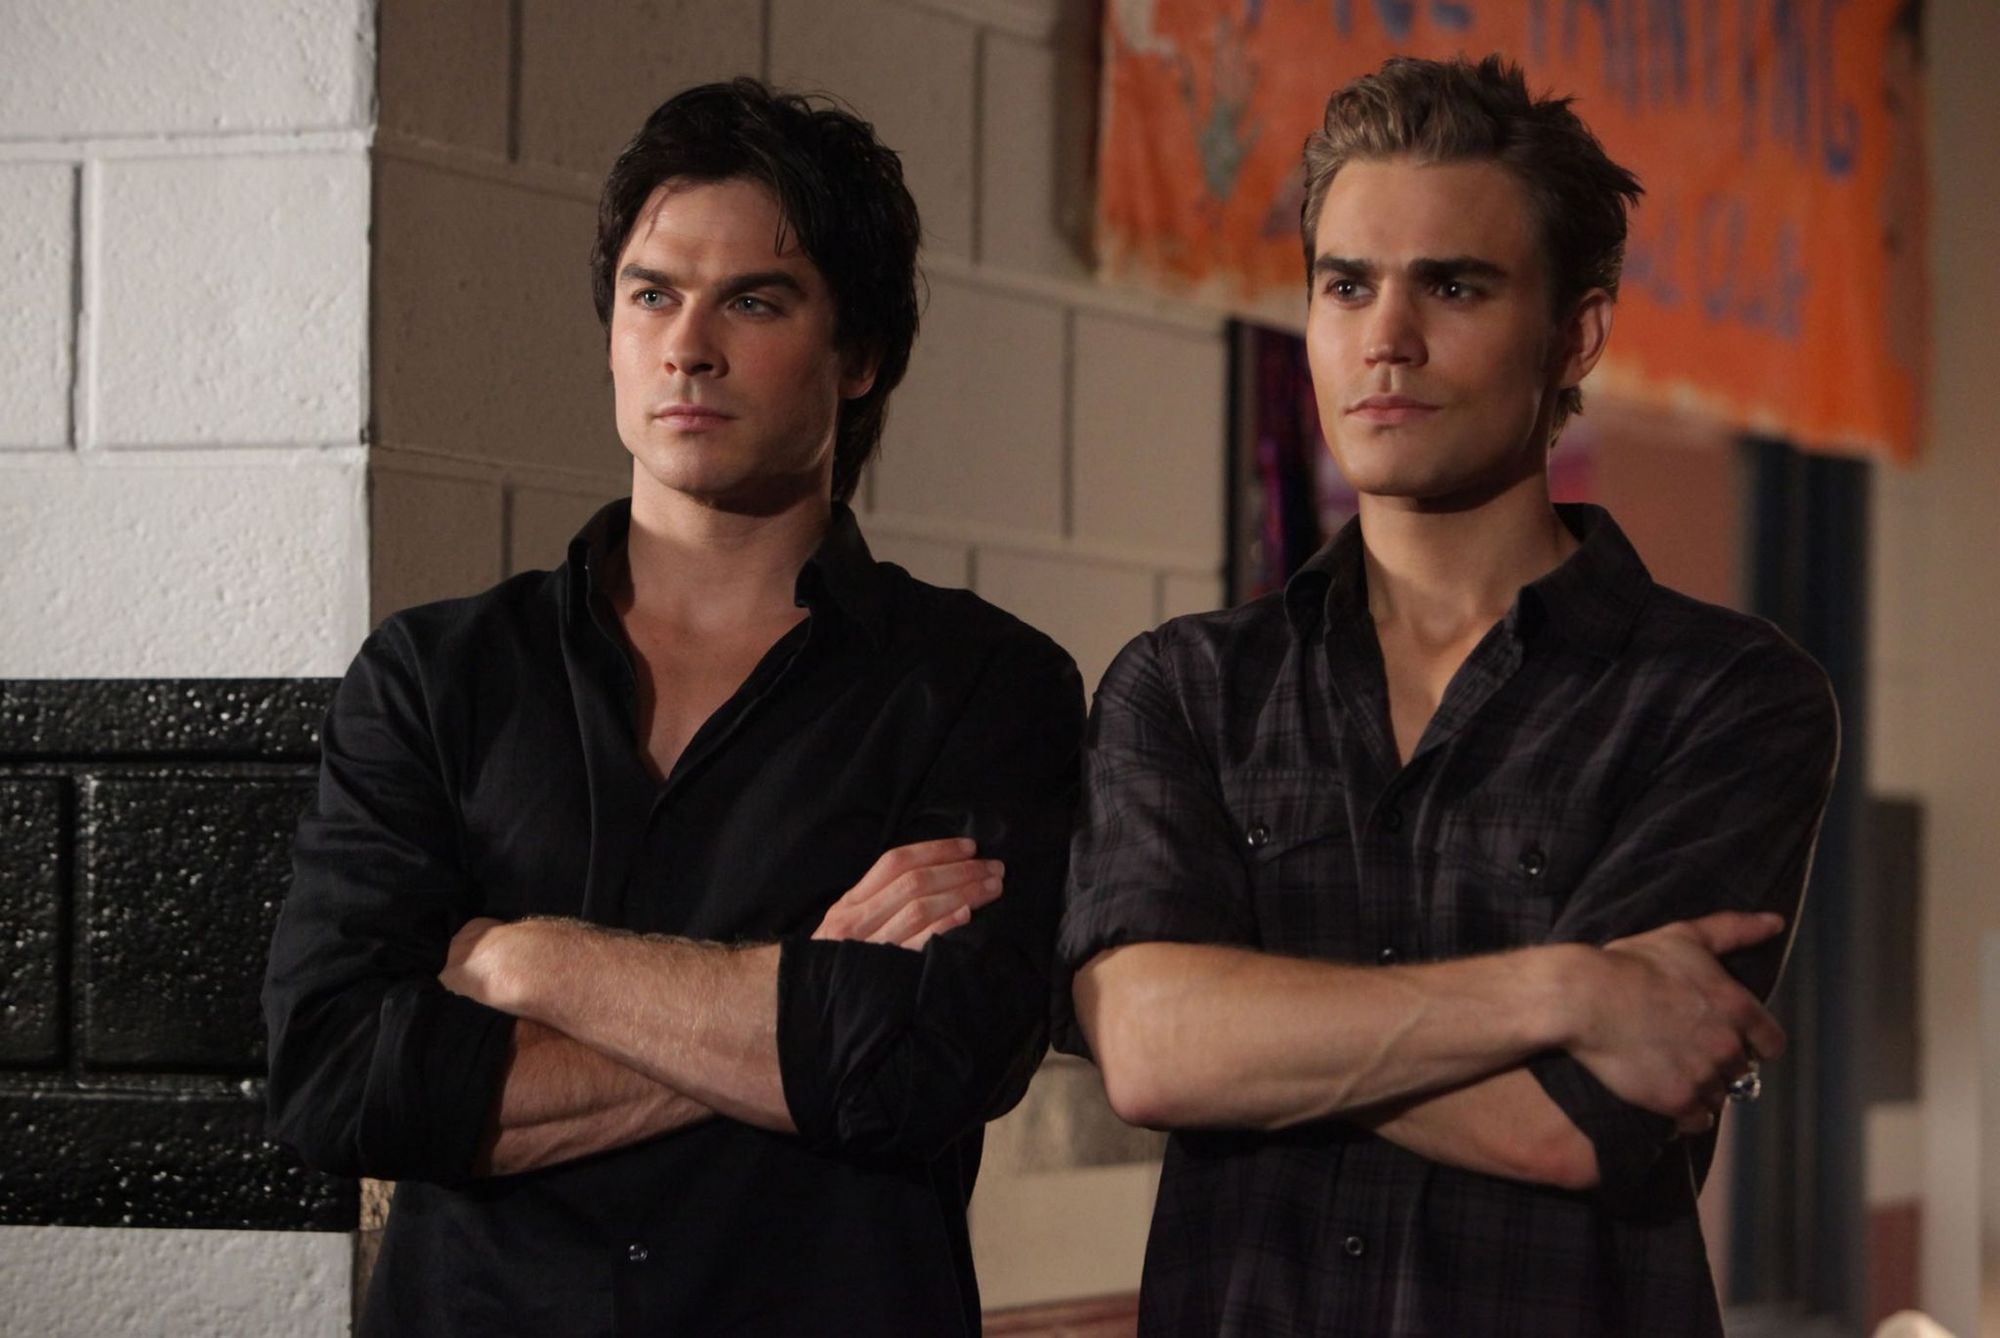 Cancel Your Mediocre January Plans ‘Coz Every Ep Of ‘The Vampire Diaries’ Is Coming To Stan